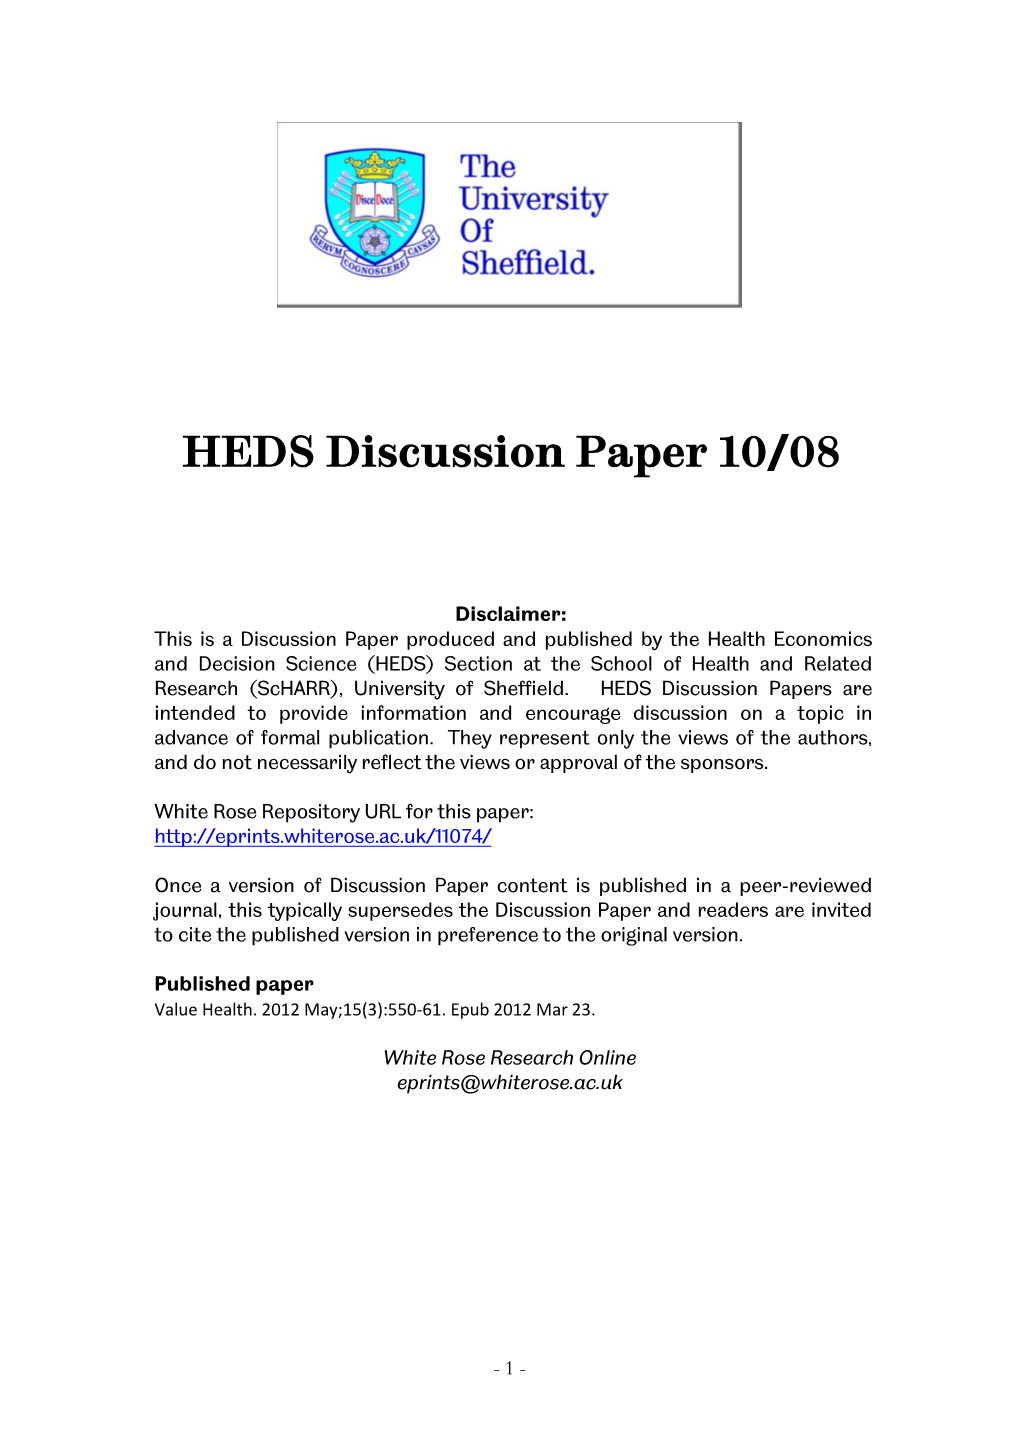 HEDS Discussion Paper 10/08